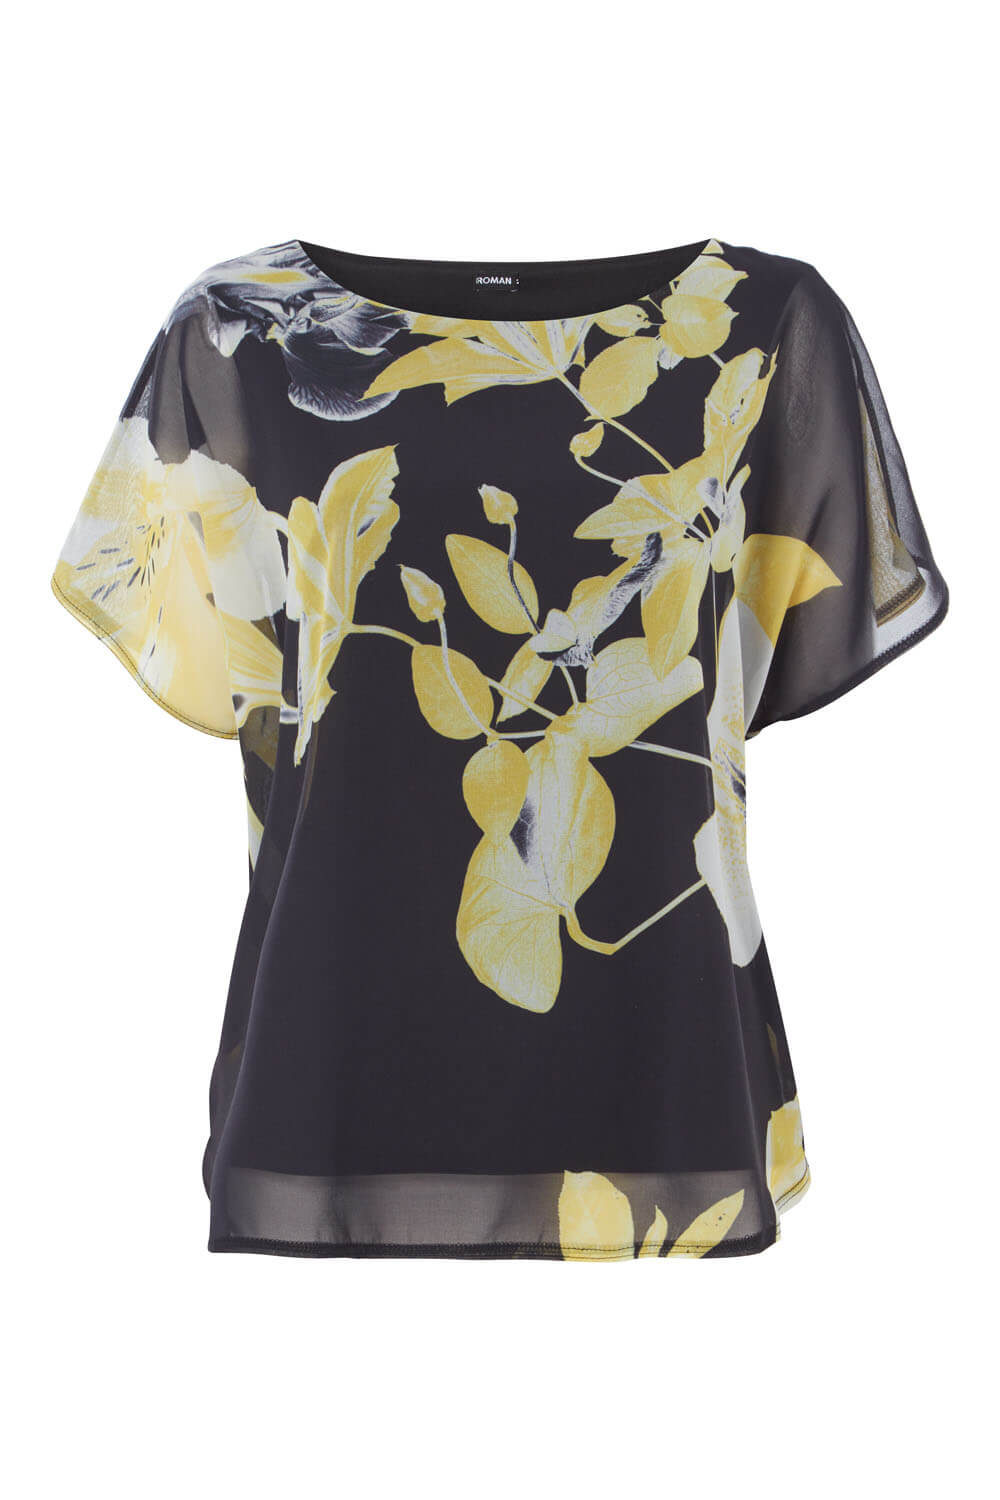 Yellow Floral Overlay Short Sleeve Top, Image 4 of 7